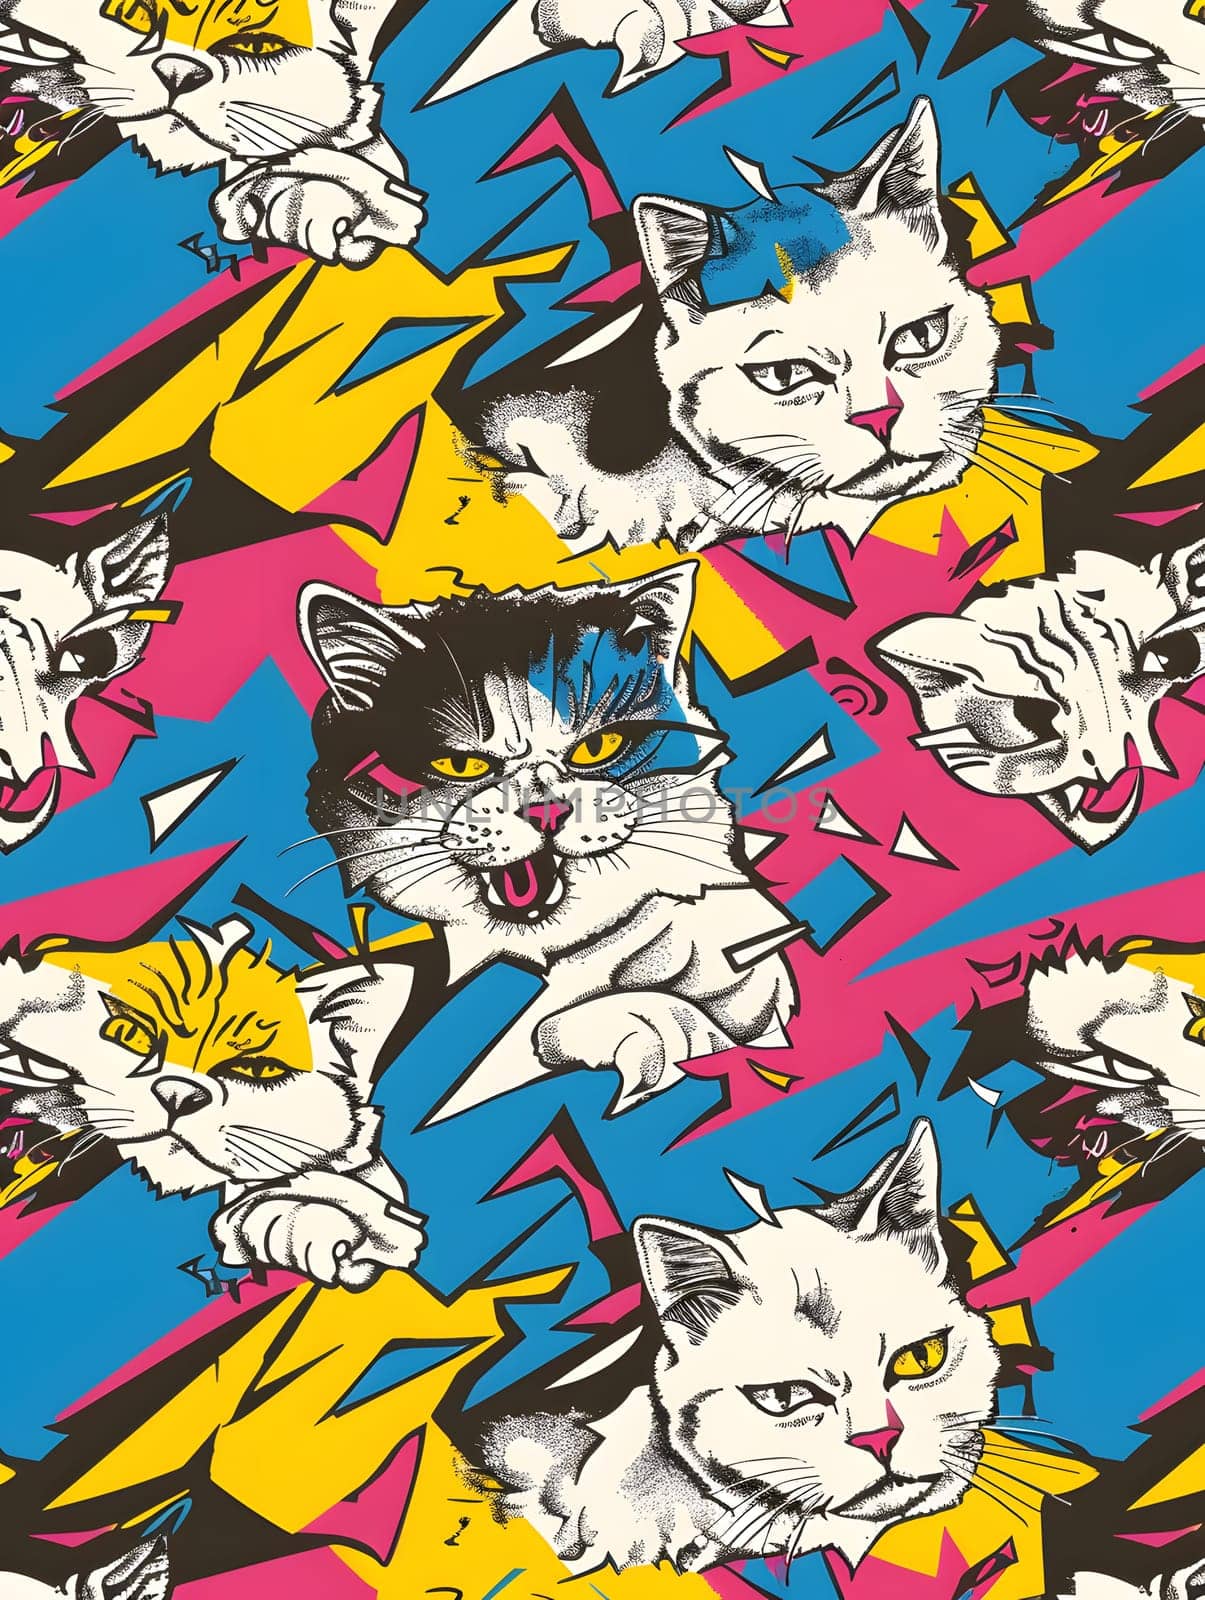 Artistic pattern featuring small to mediumsized cats on a colorful background by Nadtochiy